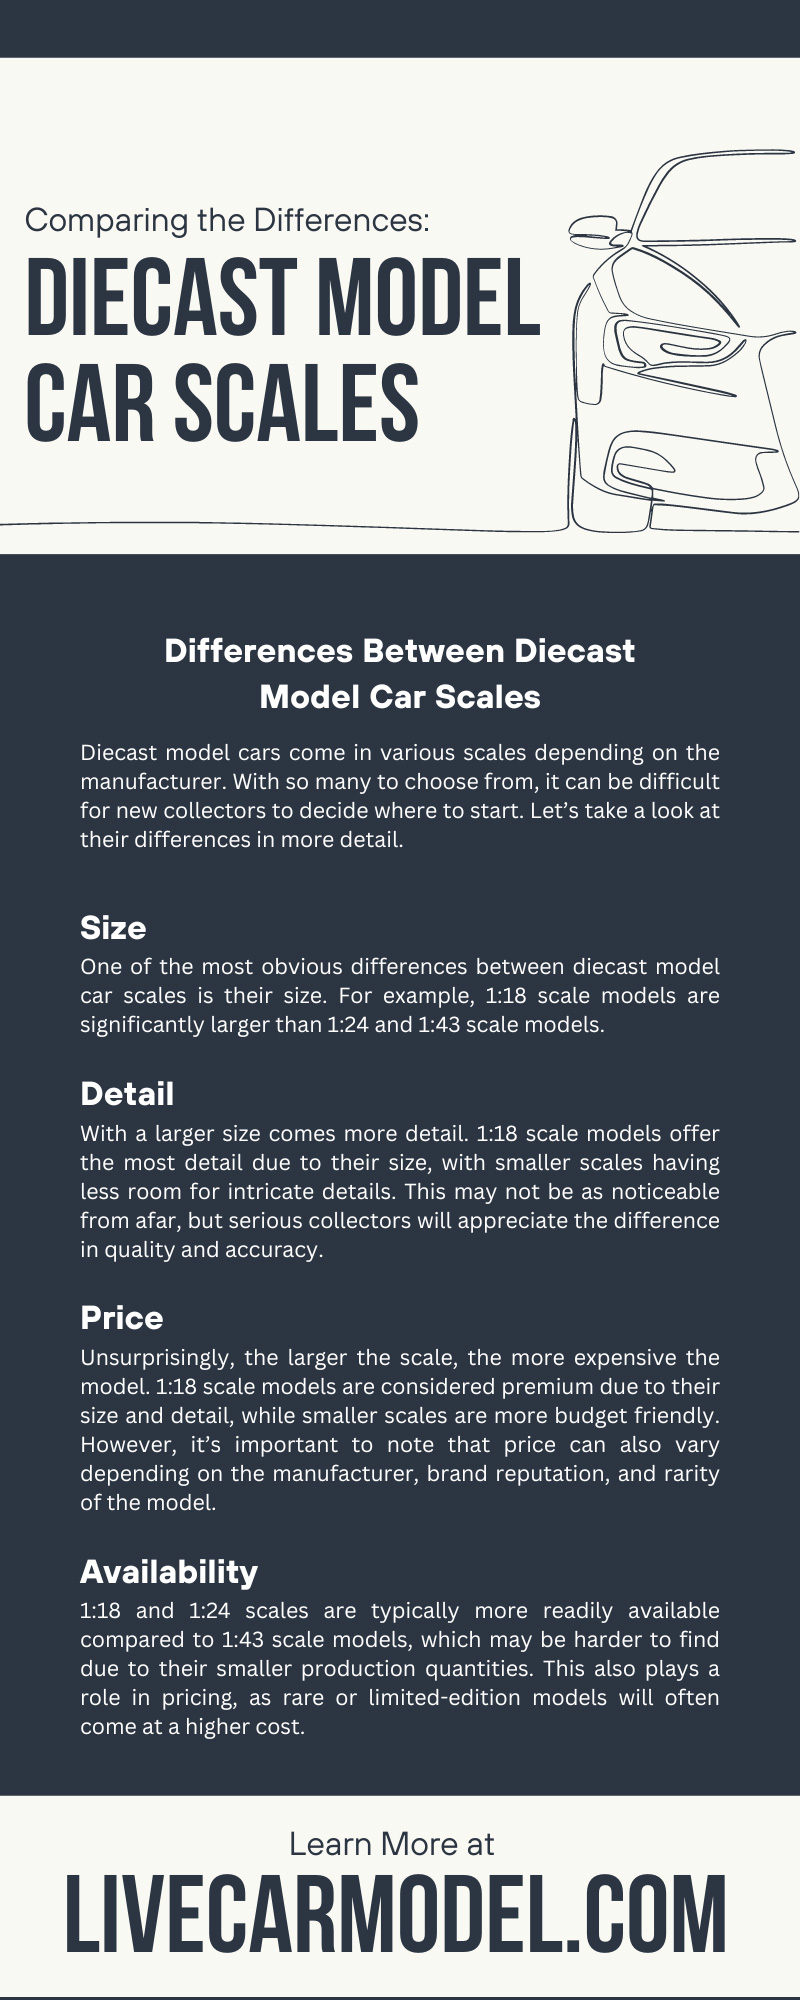 Comparing the Differences: Diecast Model Car Scales